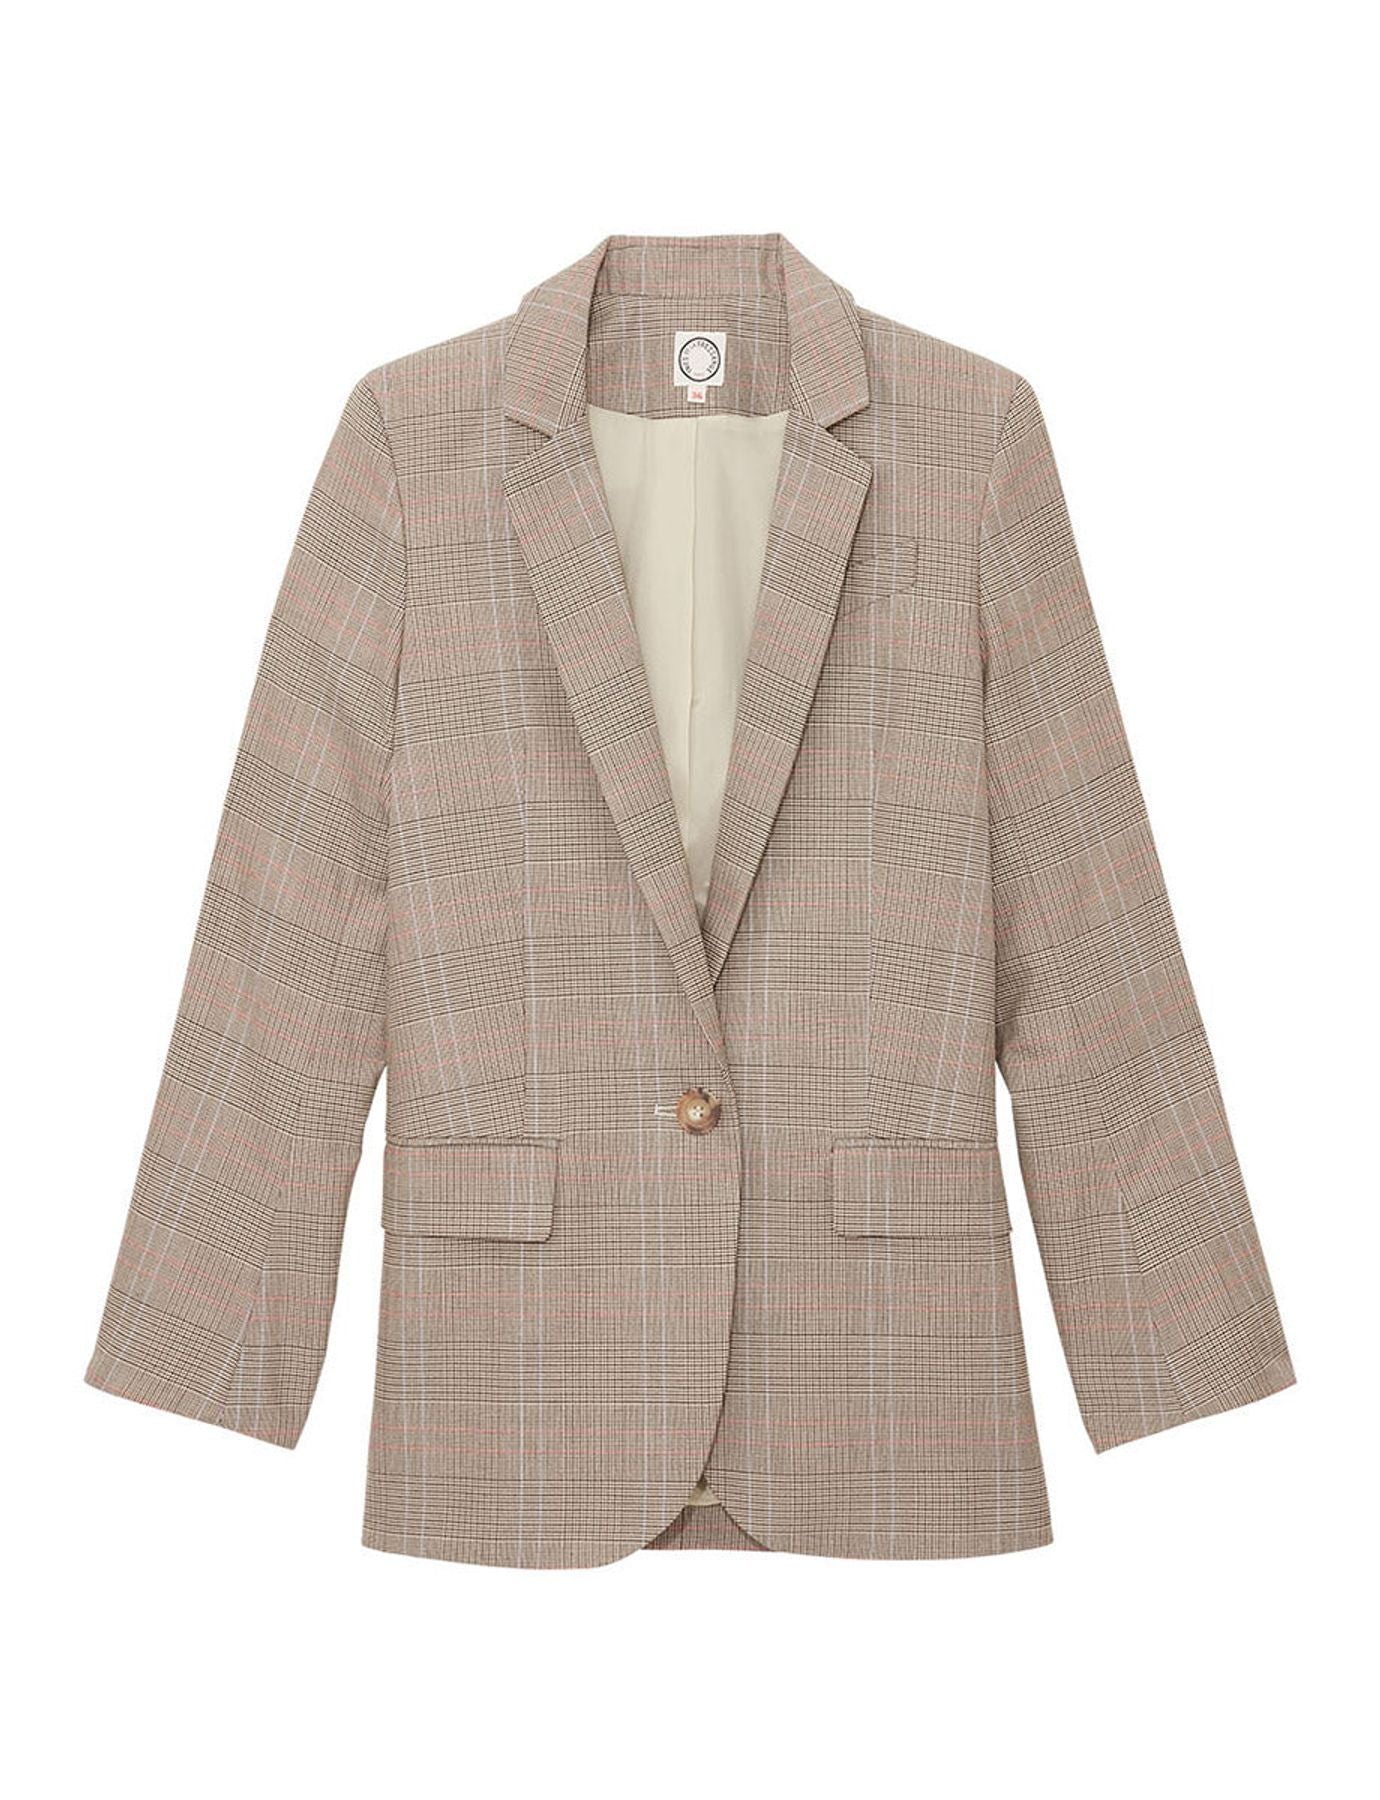 jacket-brown-in-cotton-a-carrel